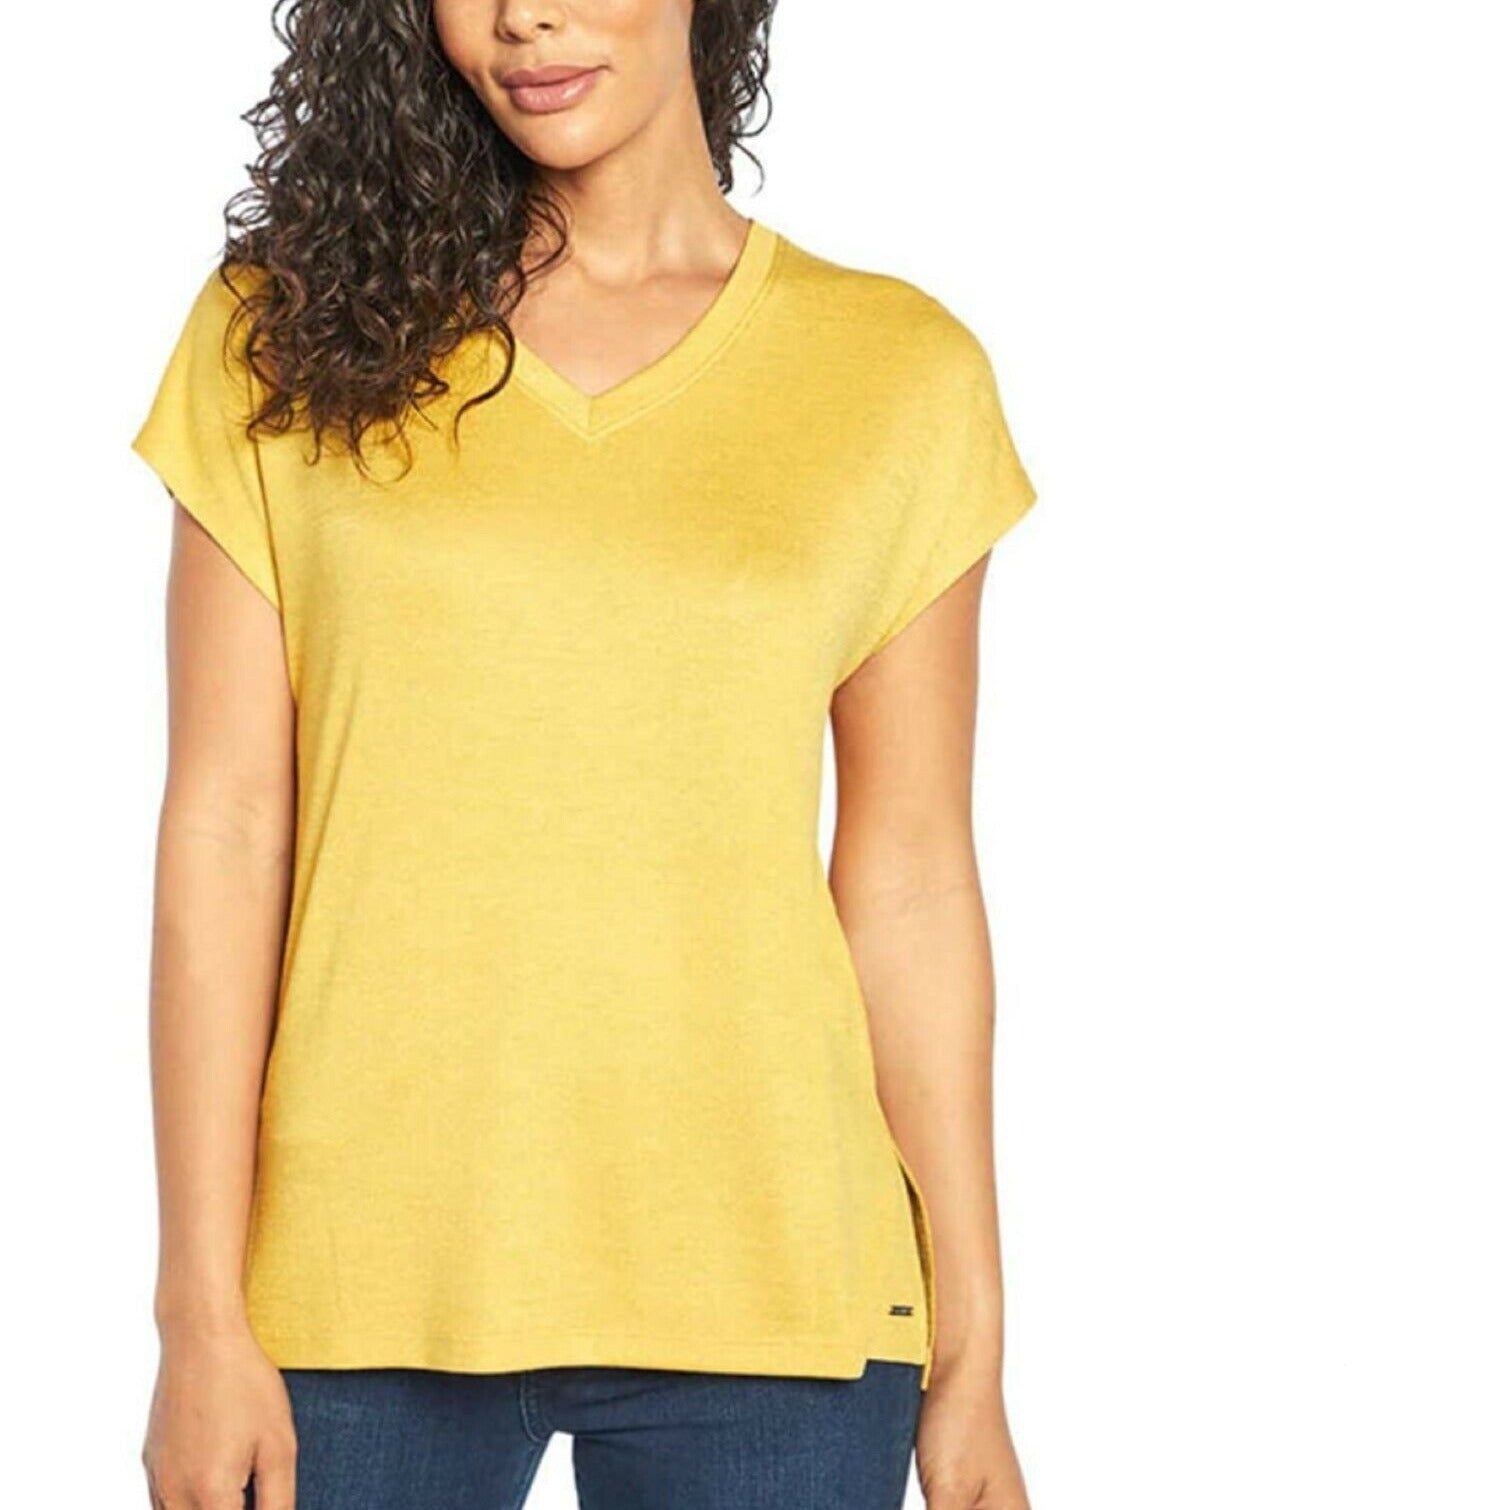 Stylish and comfortable Orvis Women's V-Neck Tunic Knit Top - perfect for any occasion!